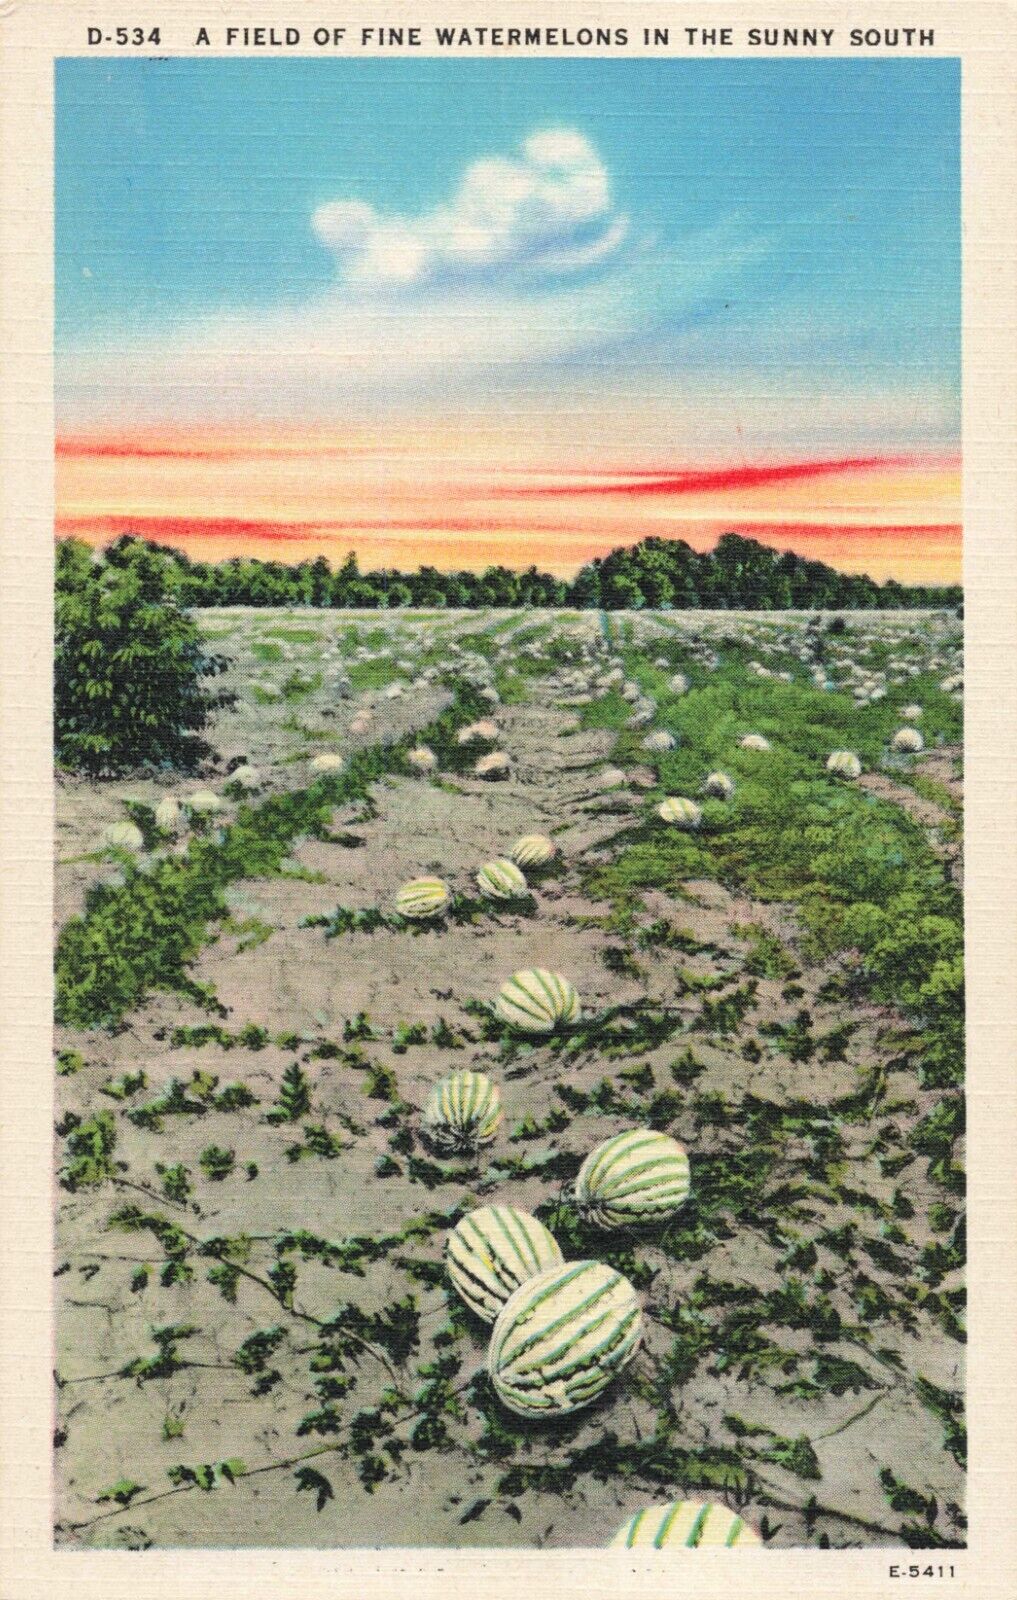 A Field of Fine Watermelons in the Sunny South, Vintage Postcard